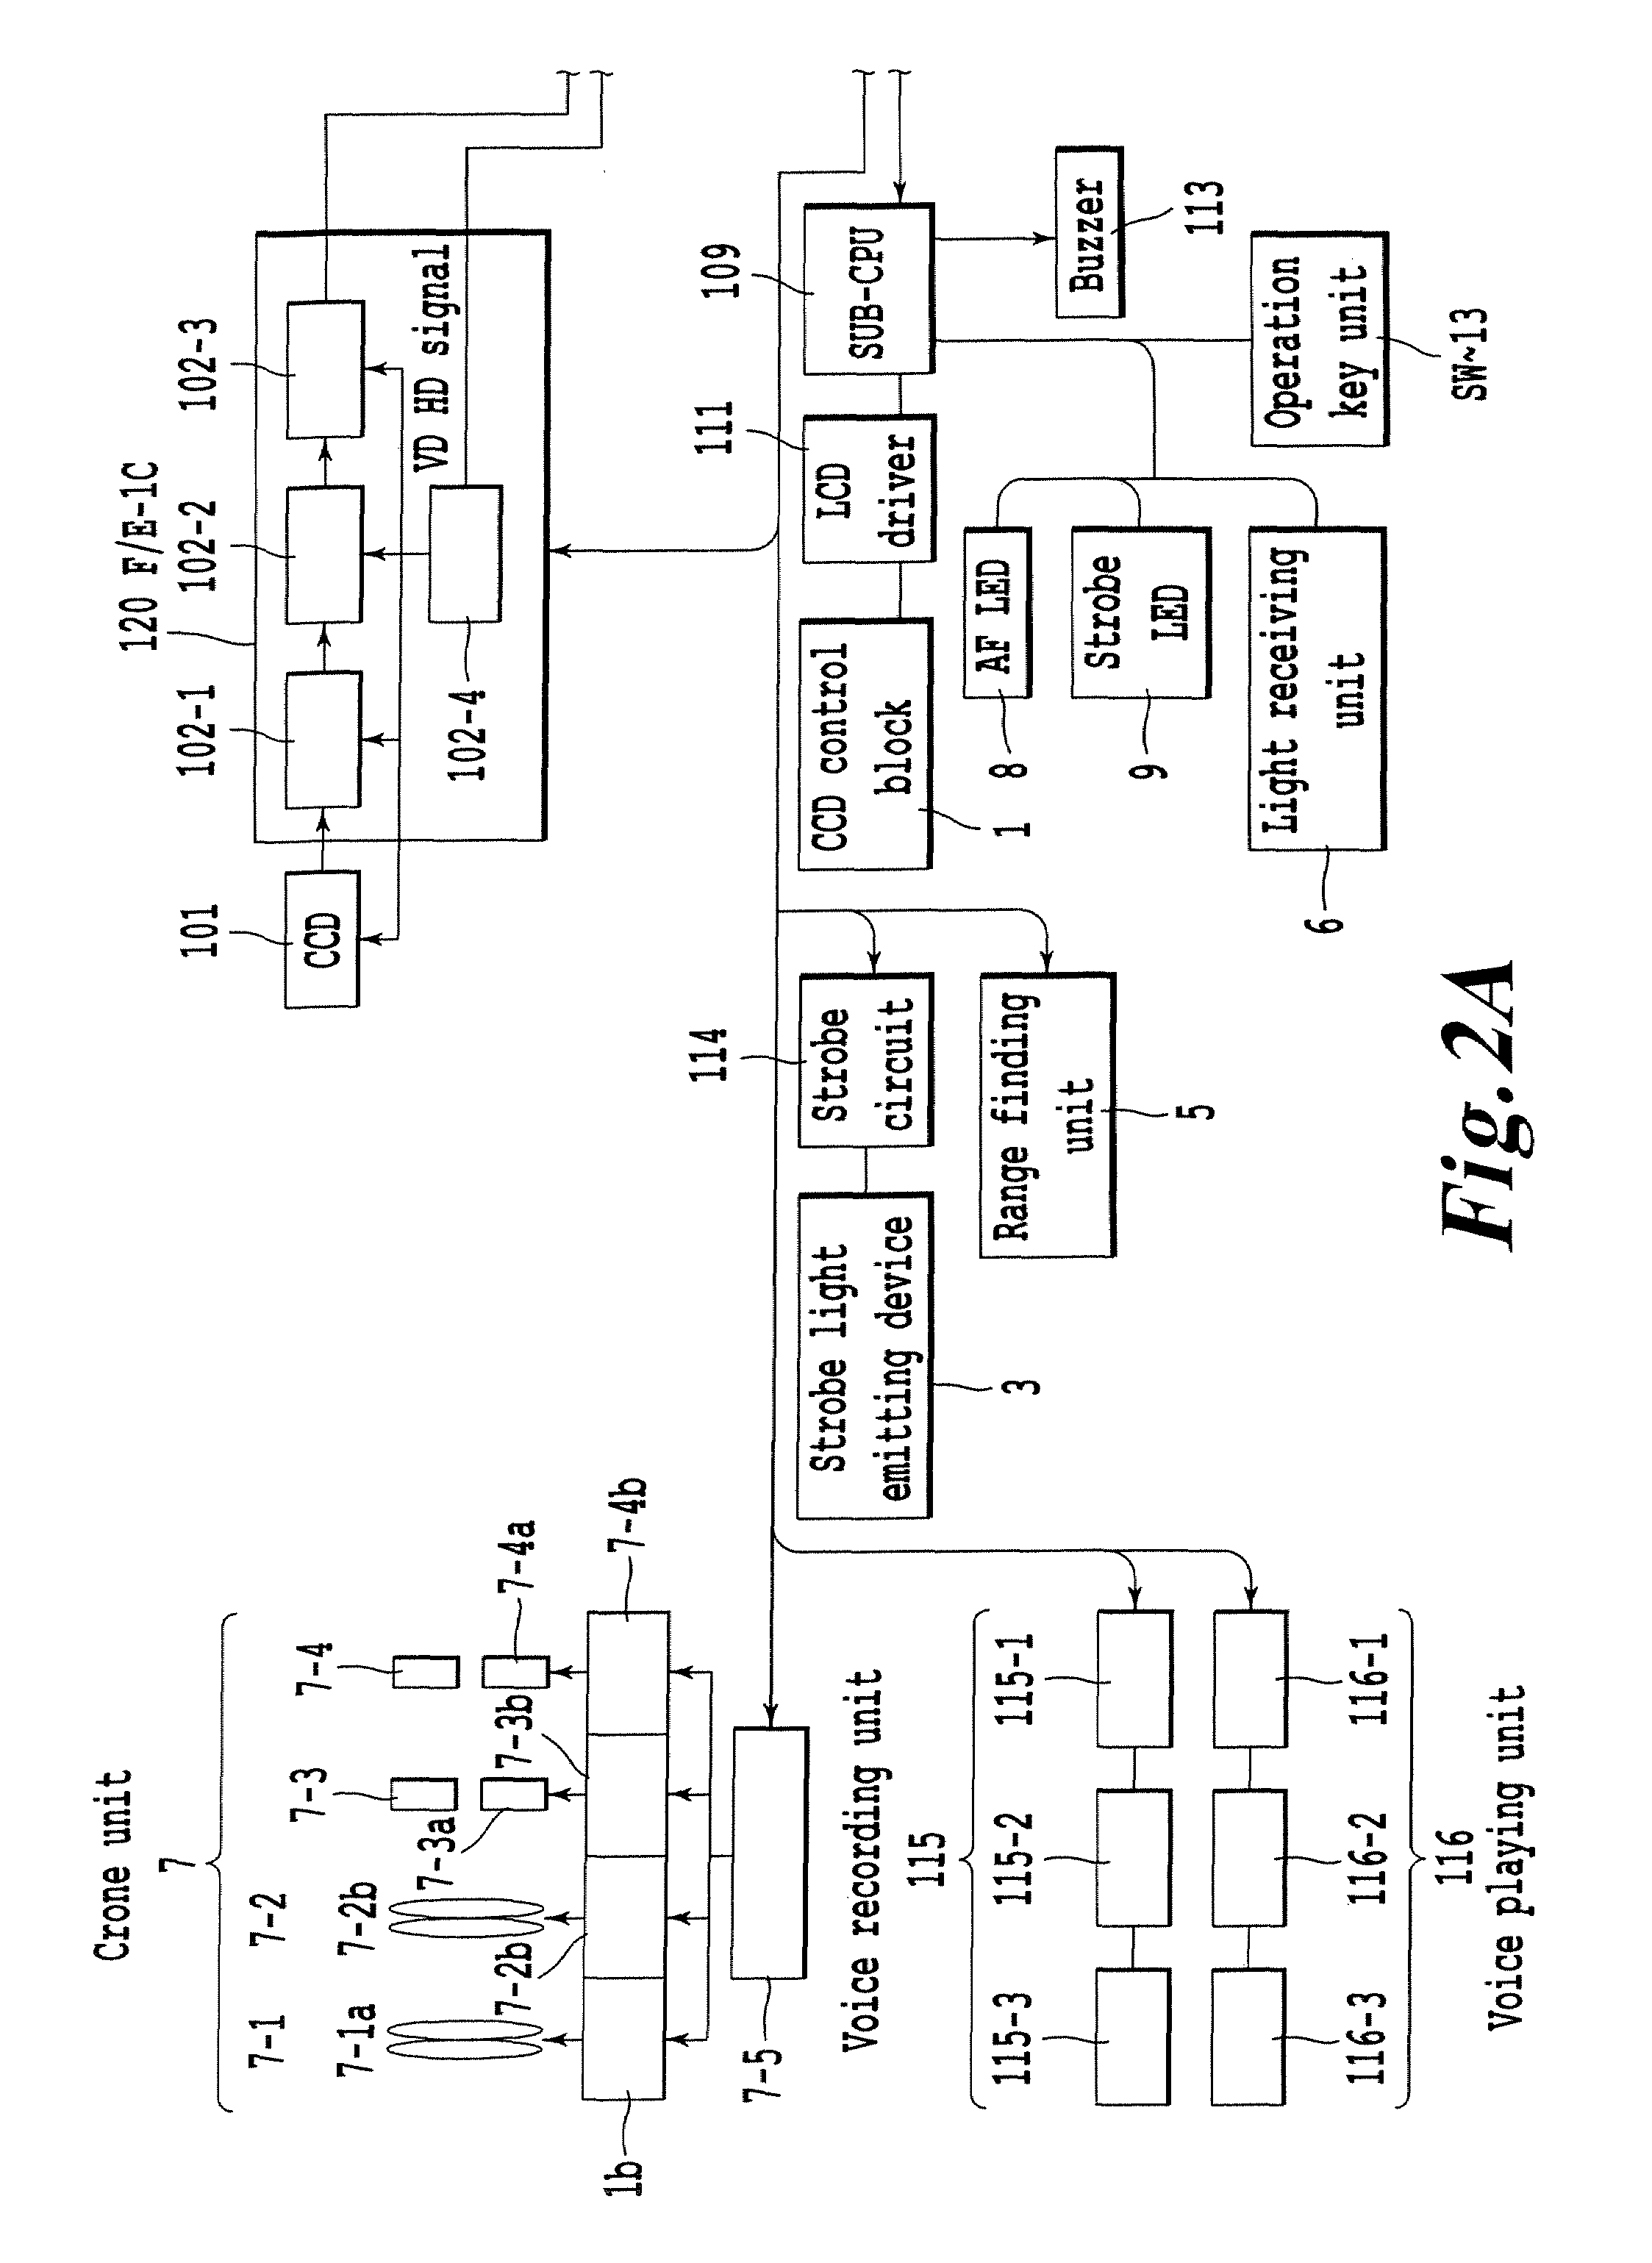 Imaging apparatus and imaging method for reducing release time lag